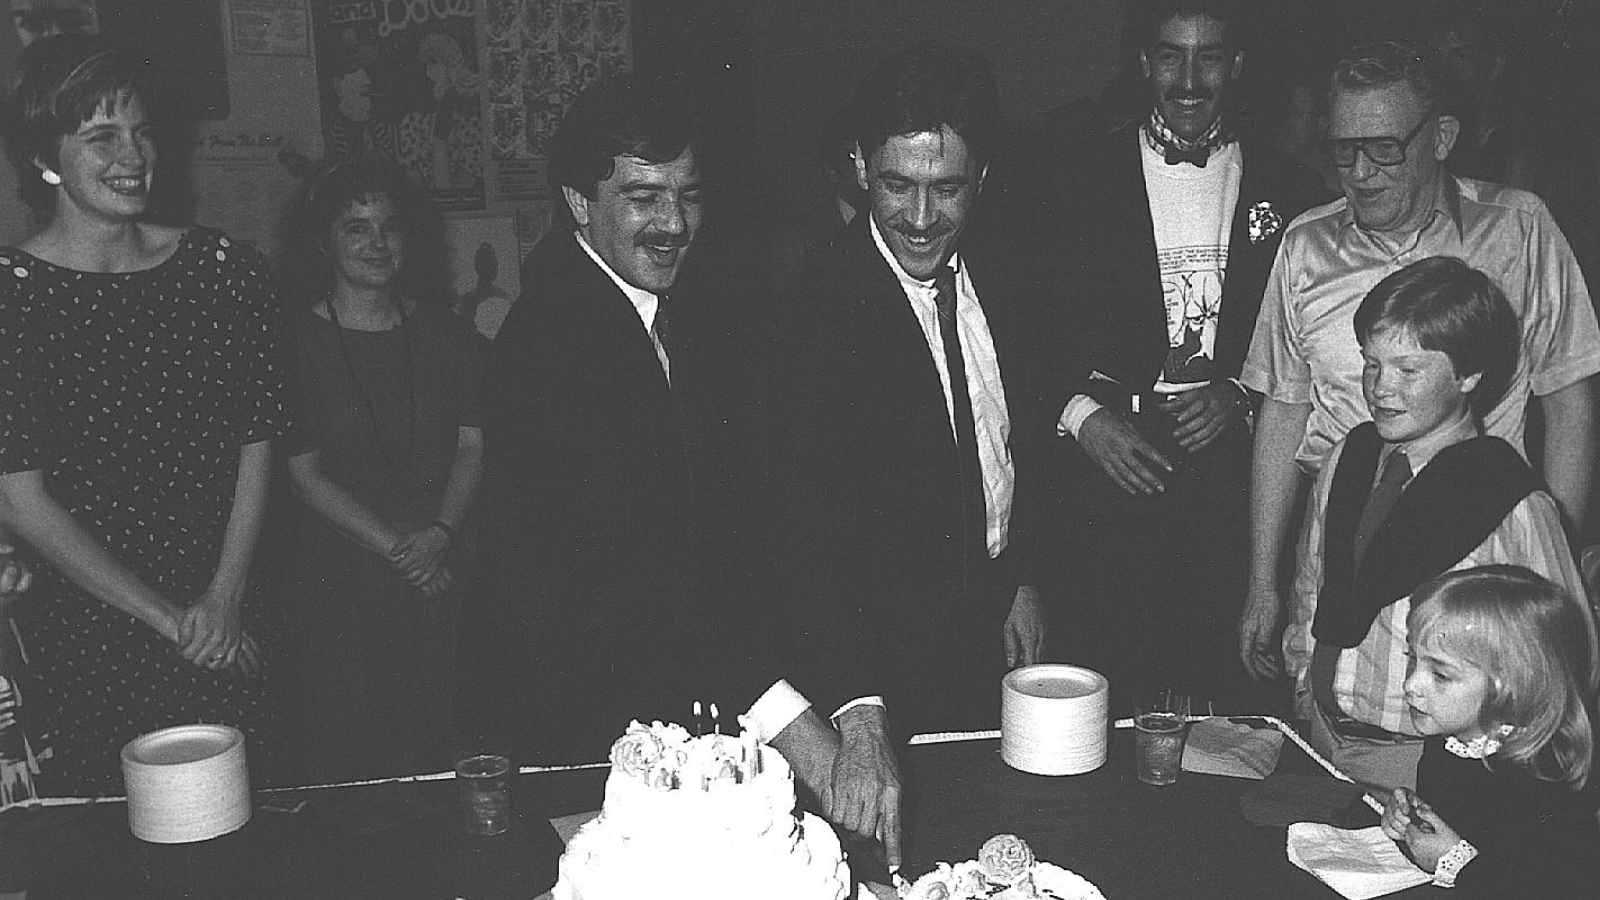 Festival Founders, Darryl Macdonald and Dan Ireland, cut into SIFF's 10th Birthday cake, with a bow-tied Gary Tucker (Assistant Director) in the background